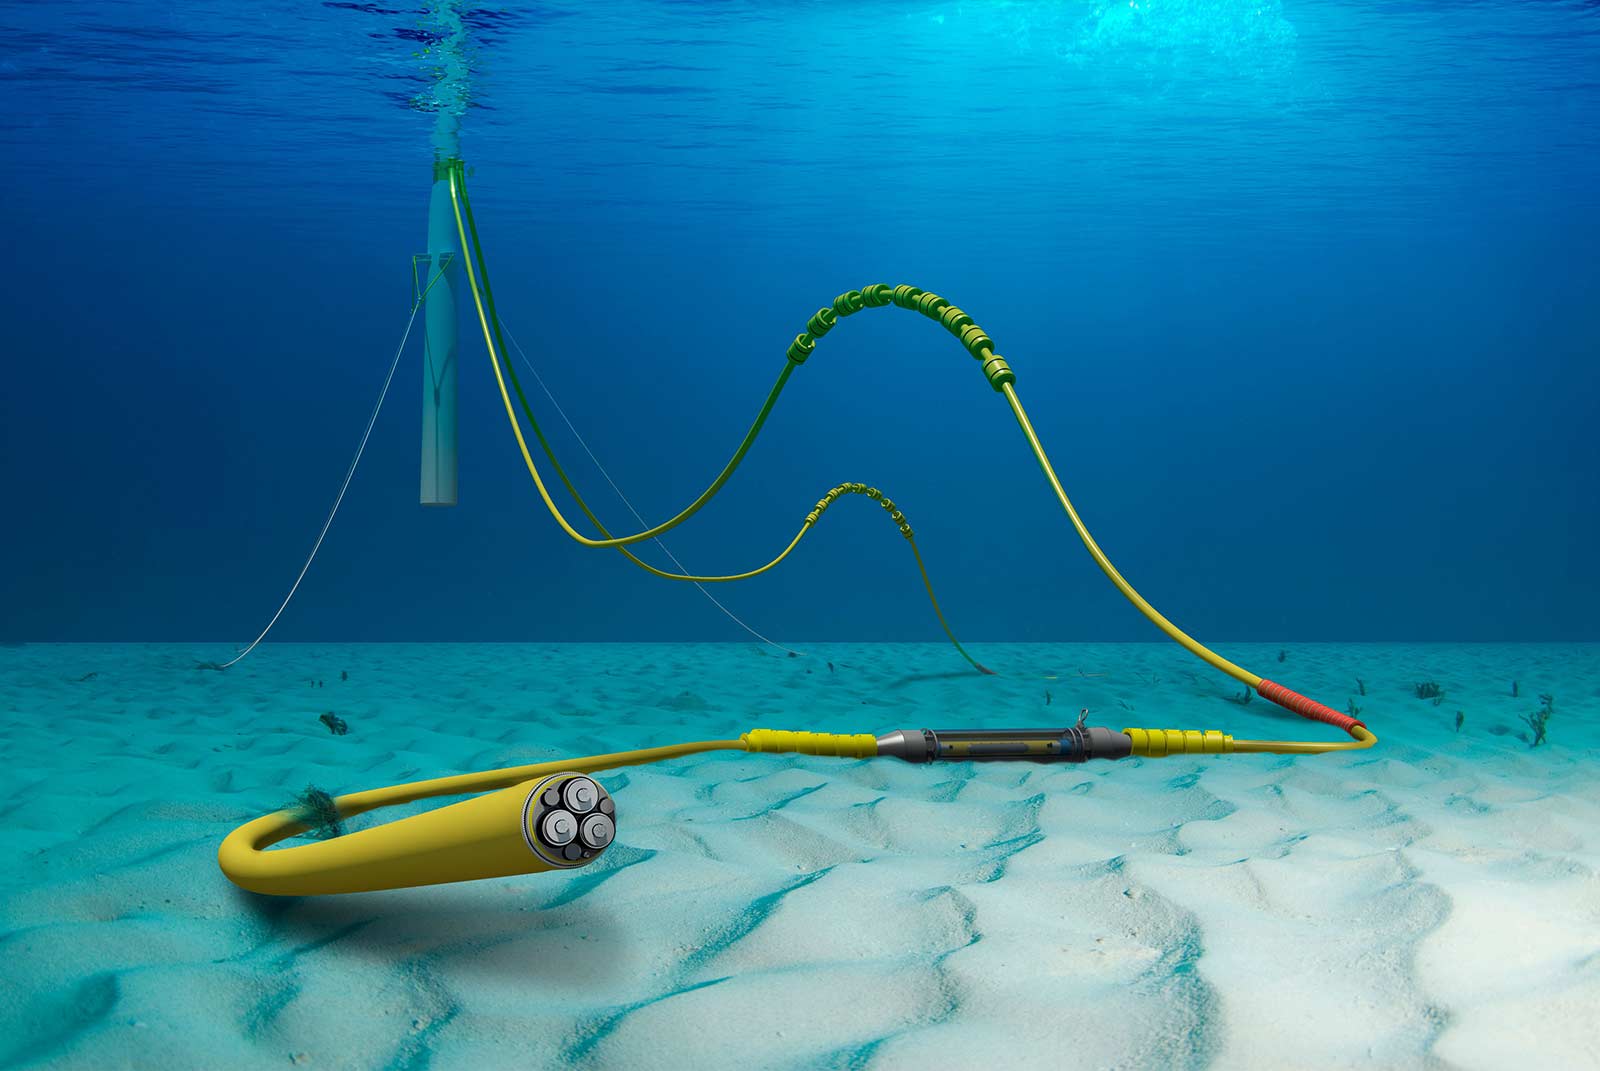 An illustration of a yellow cable sitting on a light tan ocean floor. The water is dark blue. In the background, the cable is connected to a light gray floating rod that appears to come from the ocean surface.